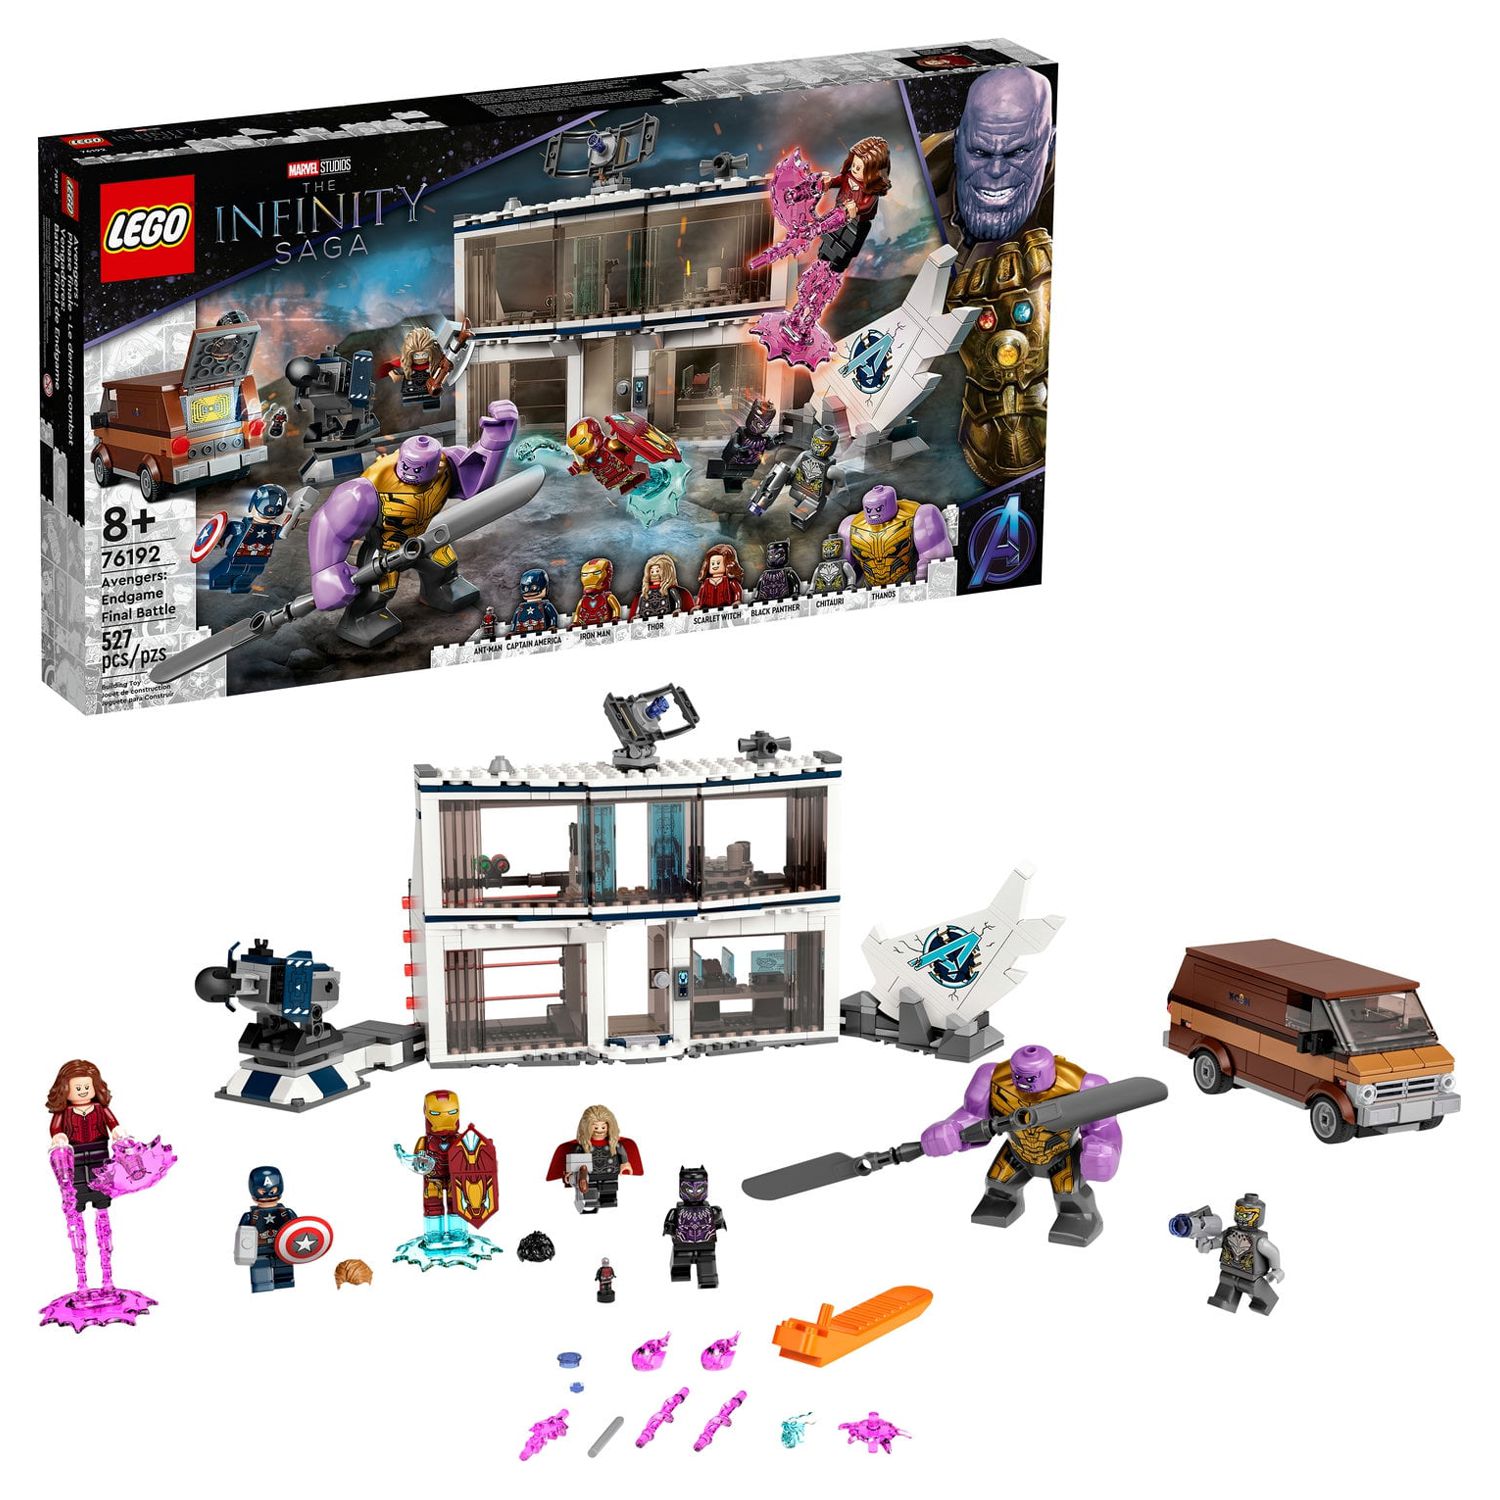 LEGO Marvel Avengers: Endgame Final Battle 76192 Collectible Building Toy (527 Pieces) - image 1 of 11